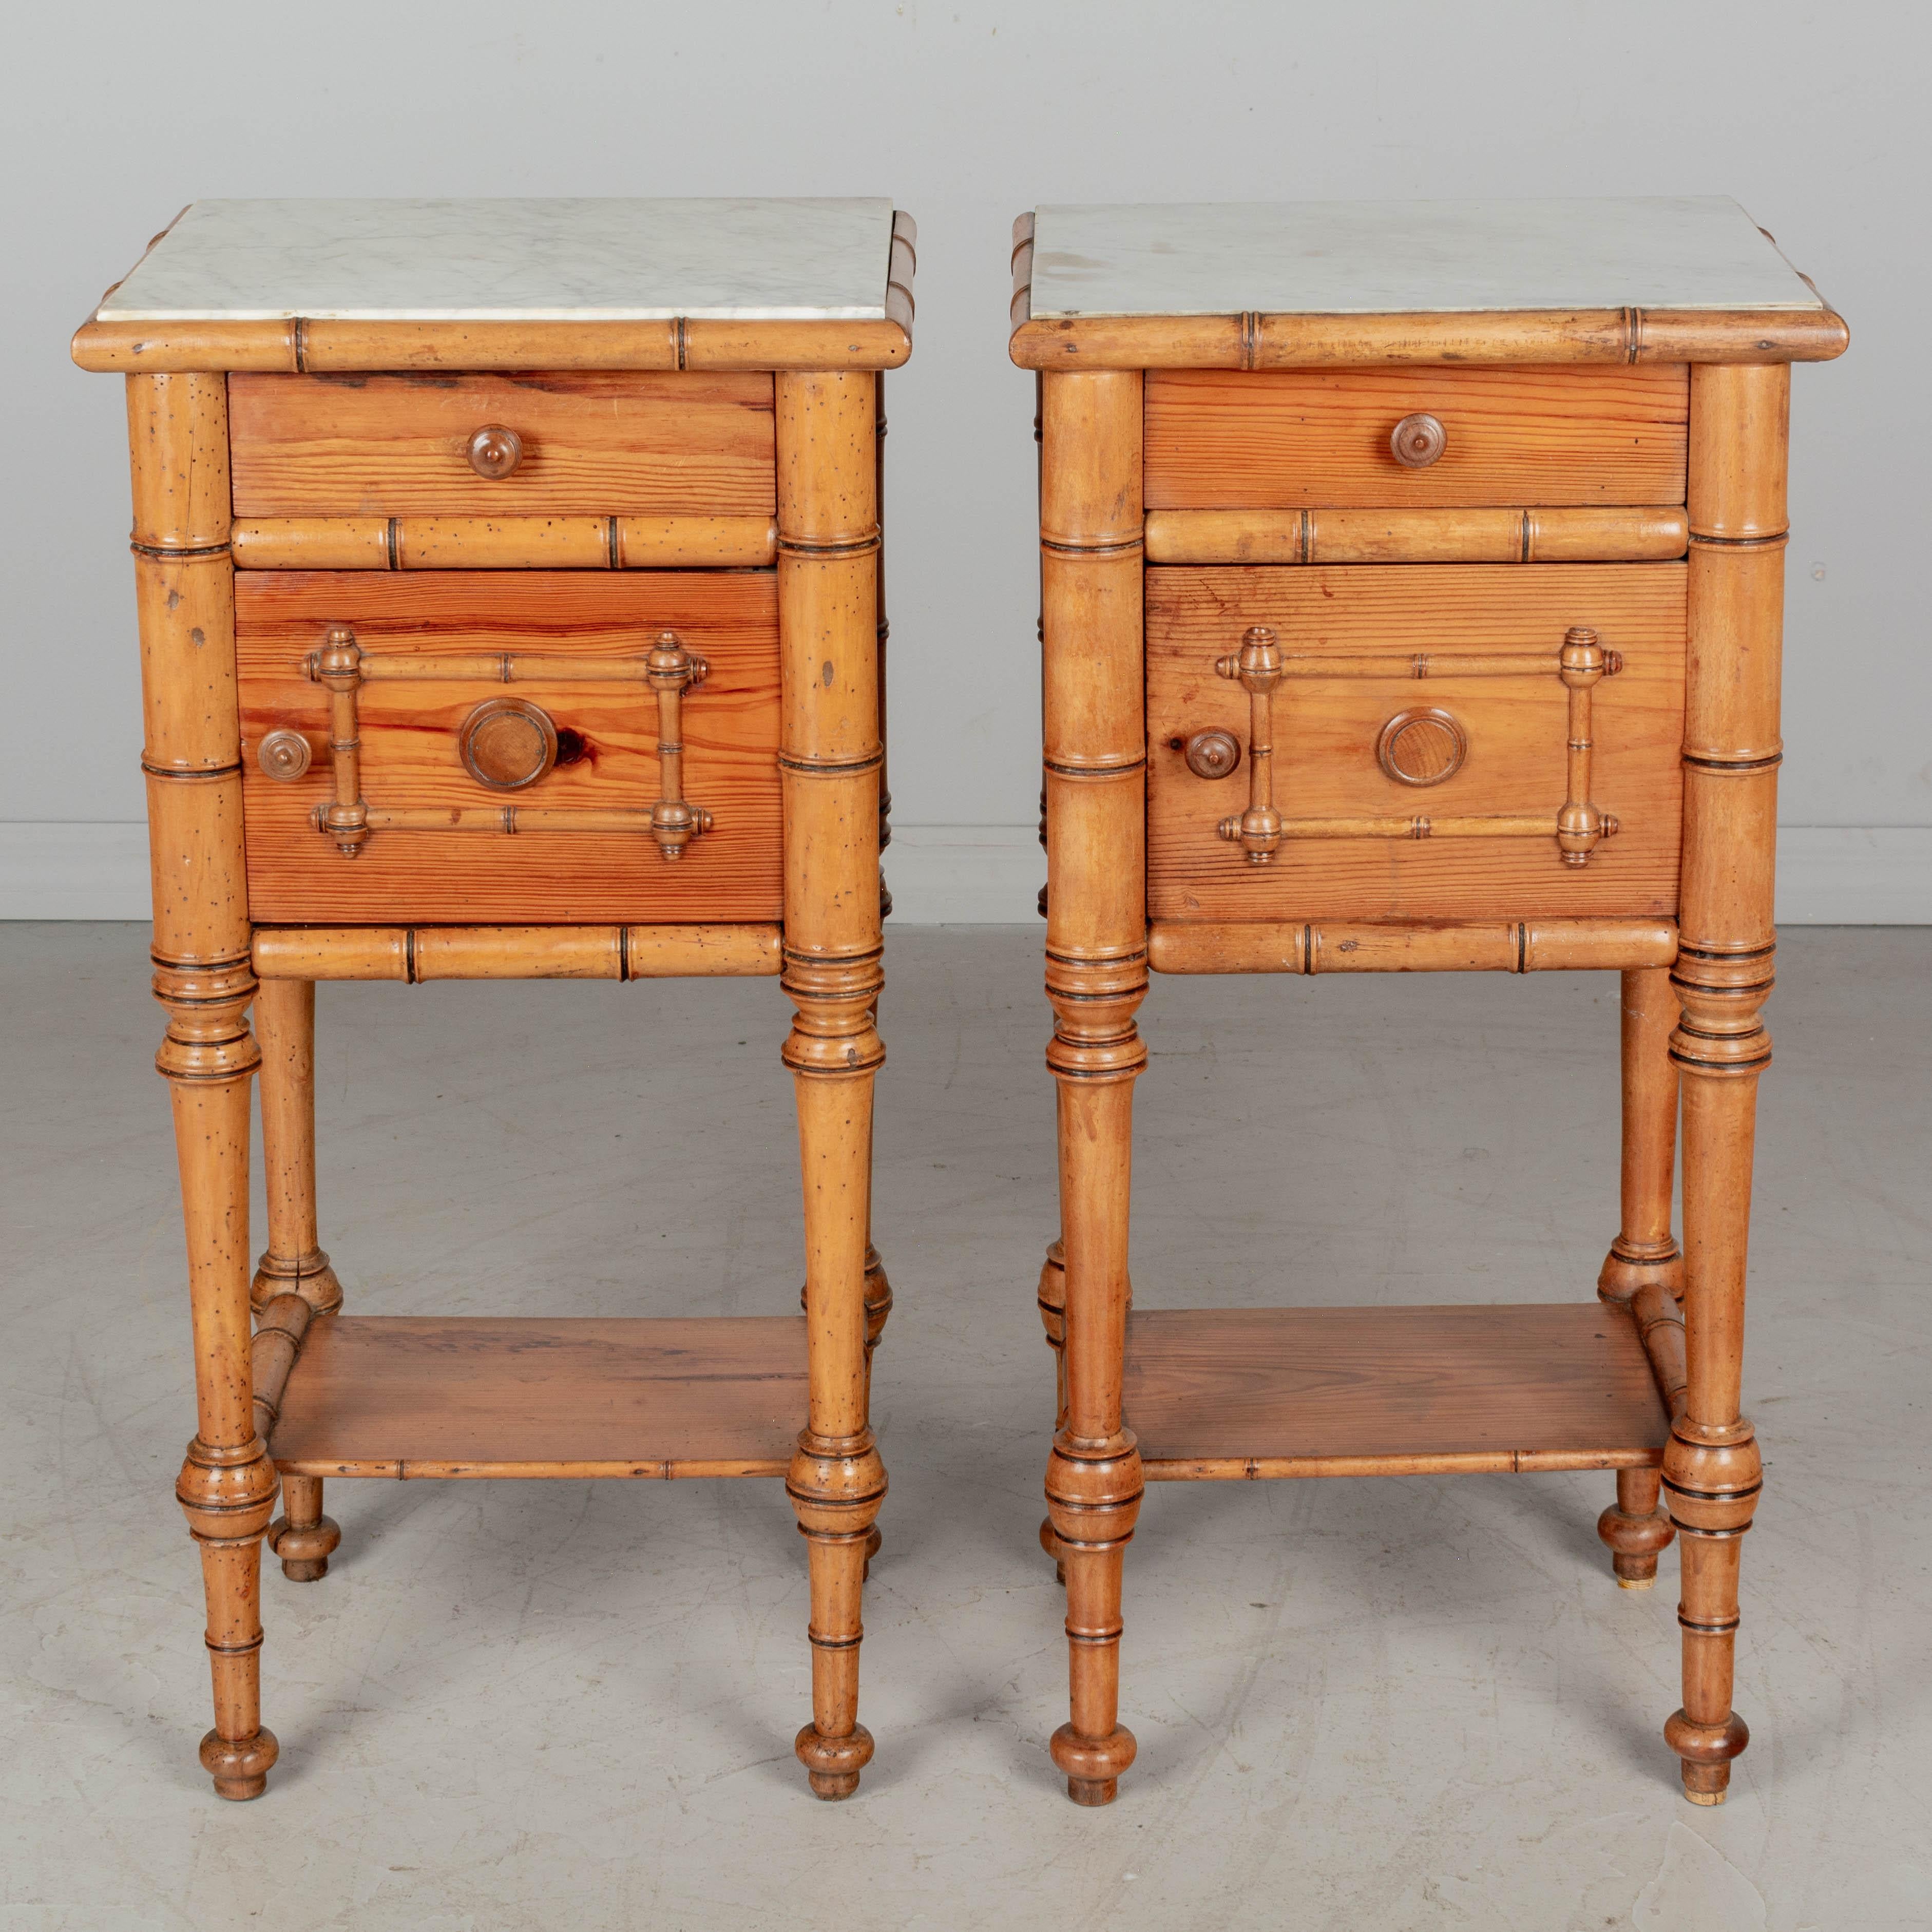 A pair of 19th century French faux bamboo marble top bedside tables, or nightstands, made of pine and turned beechwood. Dovetailed drawer above a cabinet door and lower shelf. Sturdy turned legs. Inset white marble top. Circa 1880-1900. 
Dimensions: